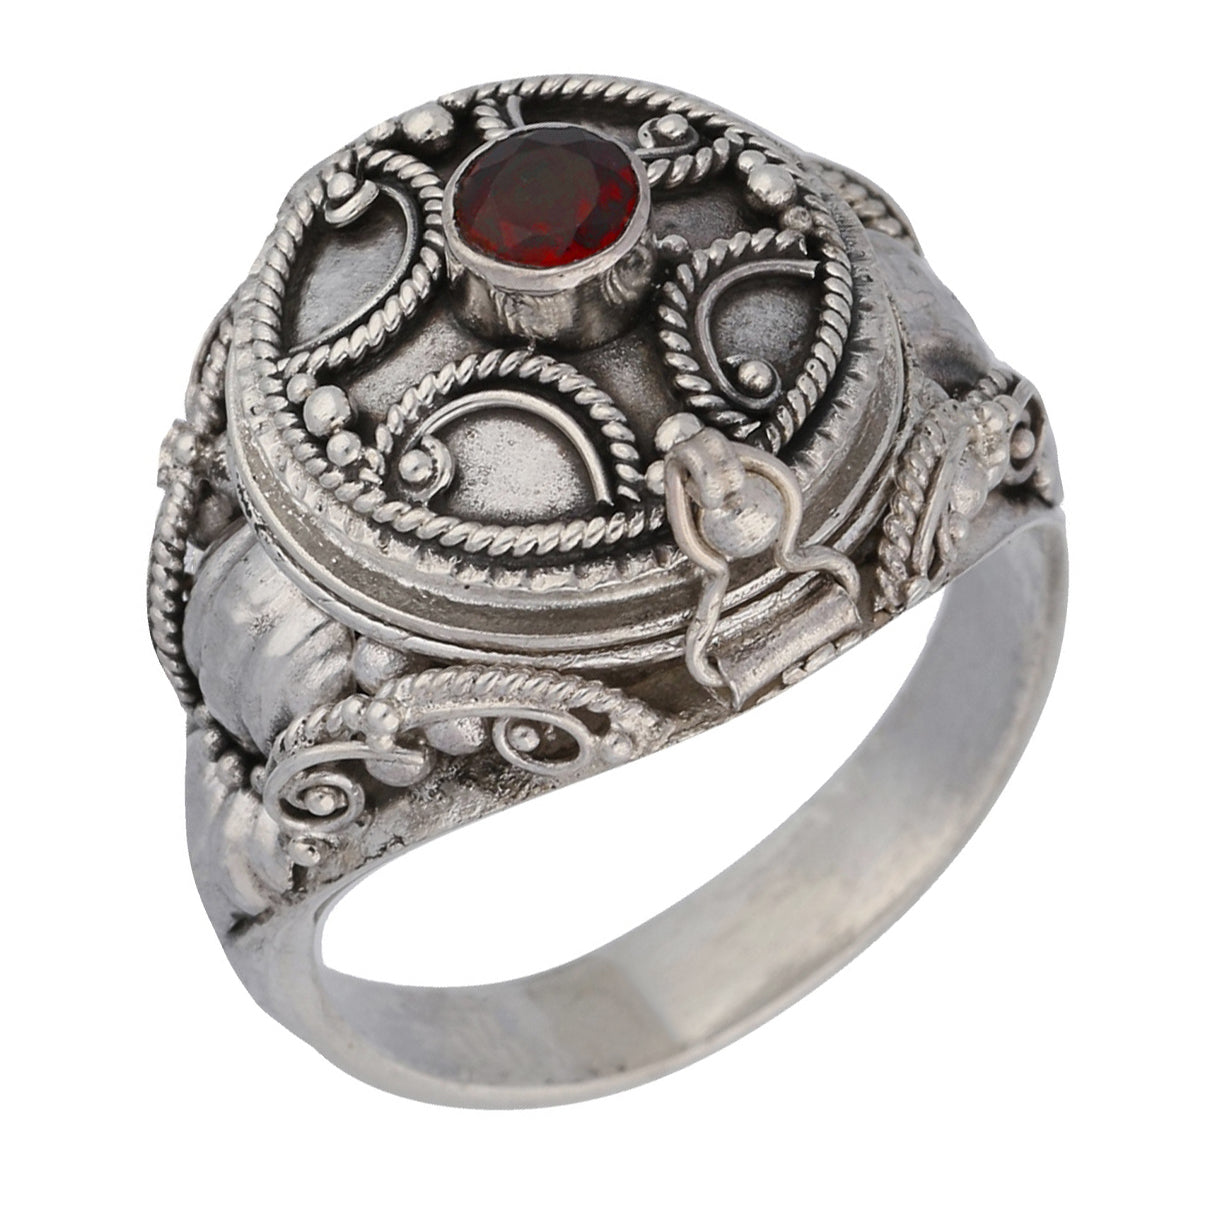 Medieval Ringed Cross Poison Locket Sterling Silver and Garnet Ring - Silver Insanity